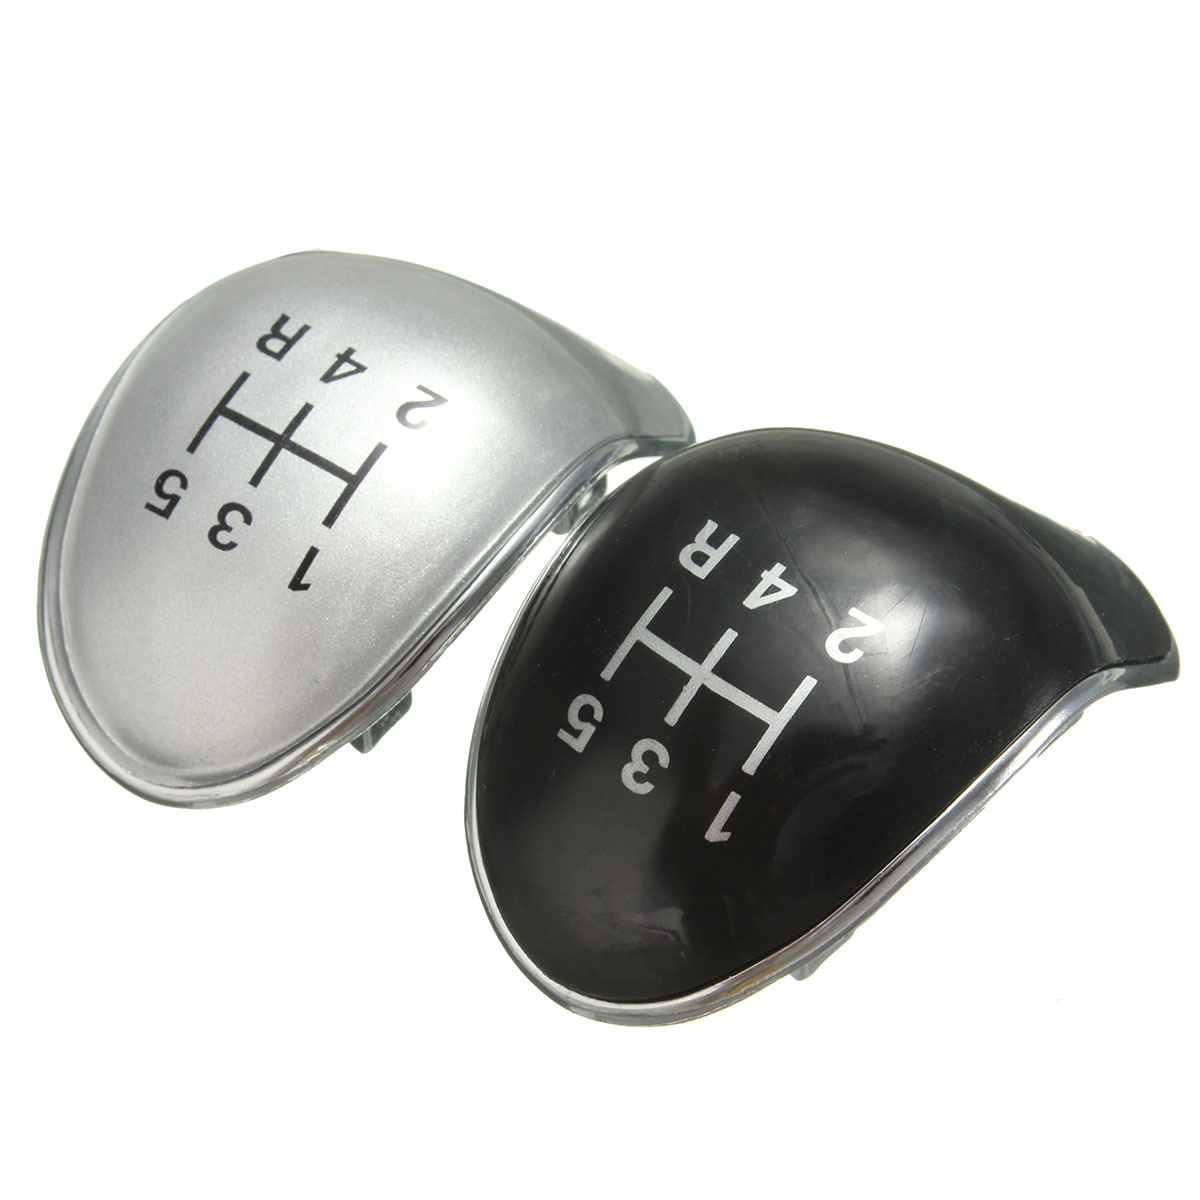 5 Speed Gear Stick Shift Knob Cap Cover Black/Chrome Replacement For Ford Fiesta Focus